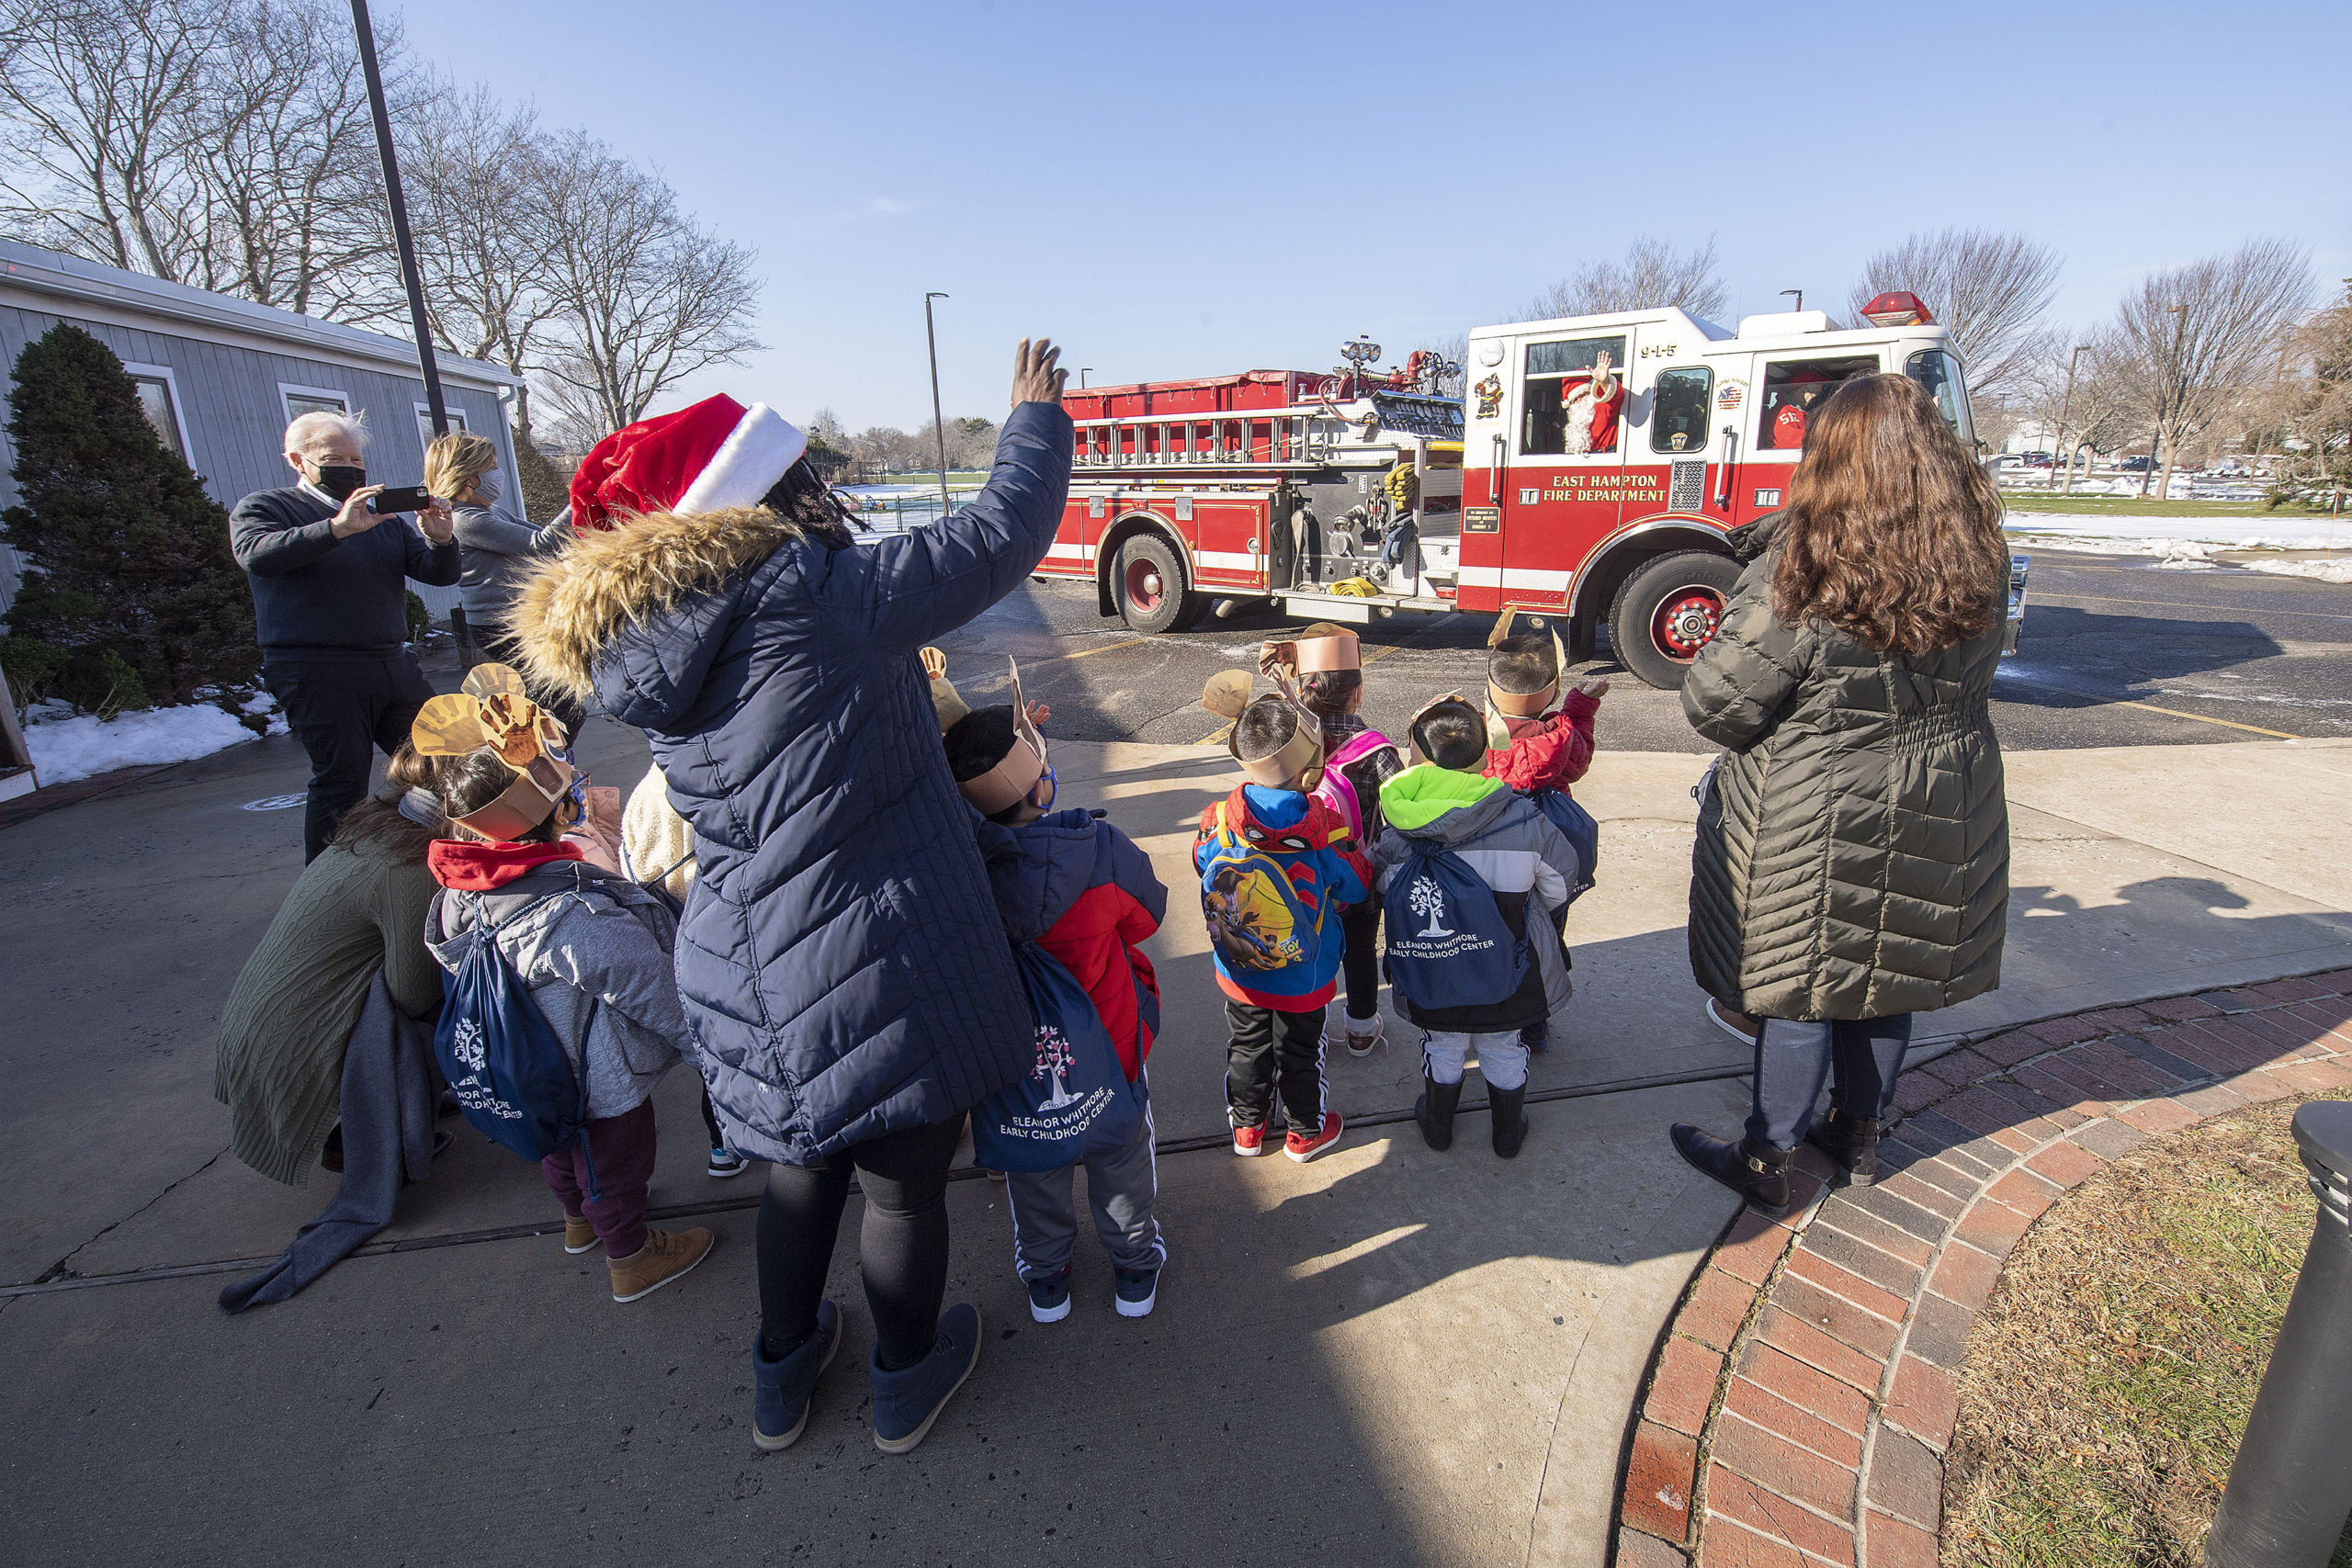 Little ones at the Eleanor Whitmore Early Learning Center in East Hampton were treated to a visit from Santa courtesy of the East Hampton Lions Club and members of the East Hampton Fire Department Engine Company #5 on Tuesday, December 22. 